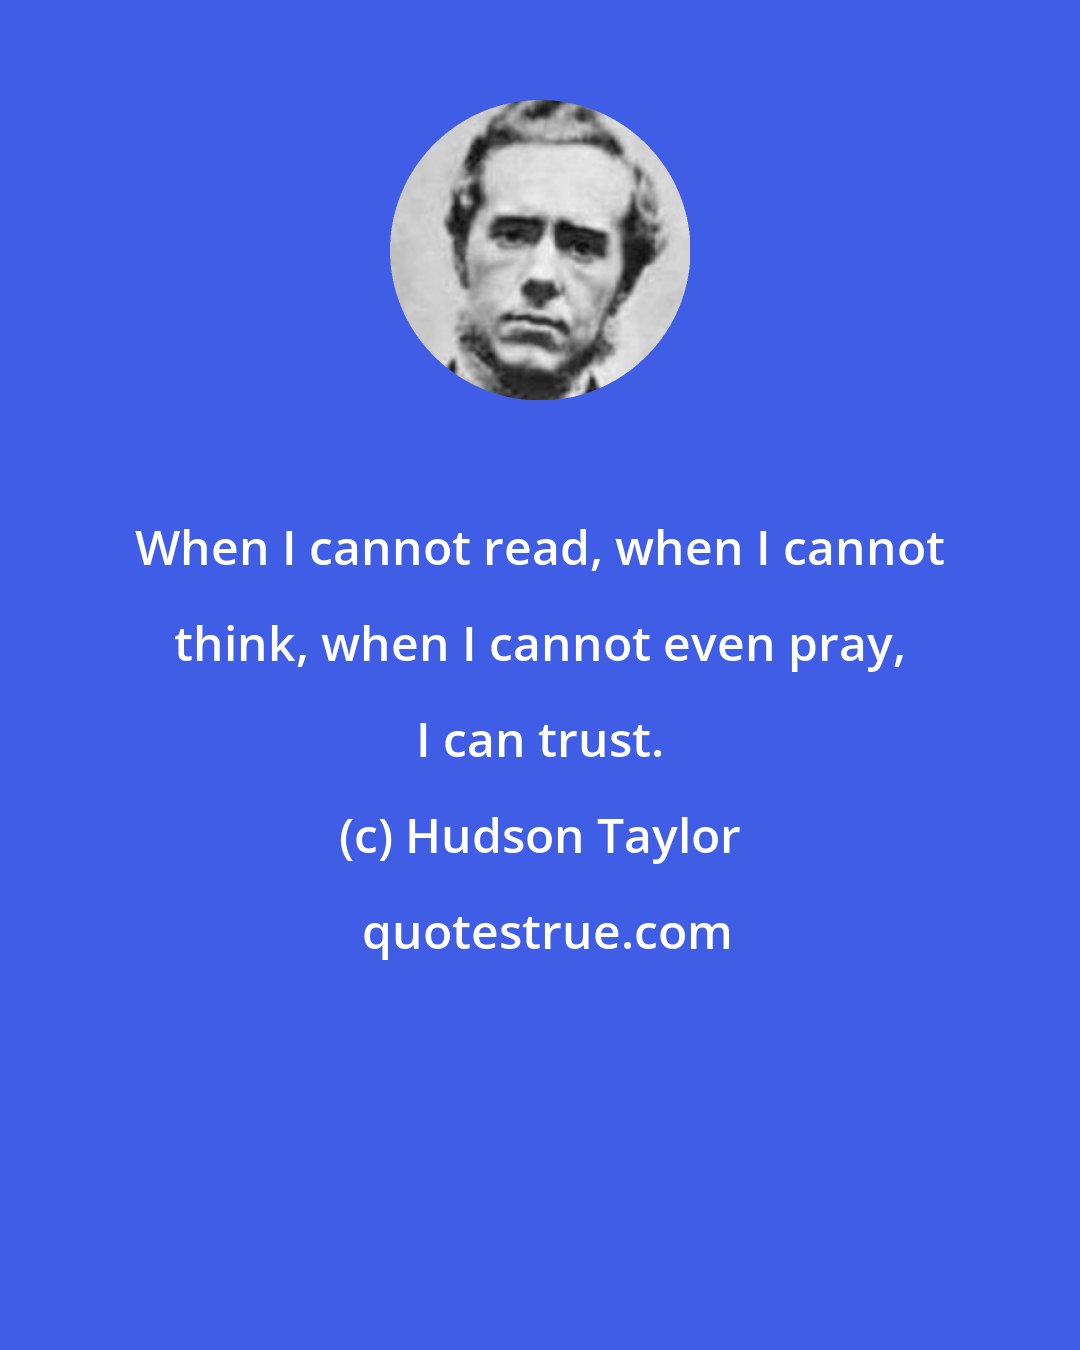 Hudson Taylor: When I cannot read, when I cannot think, when I cannot even pray, I can trust.